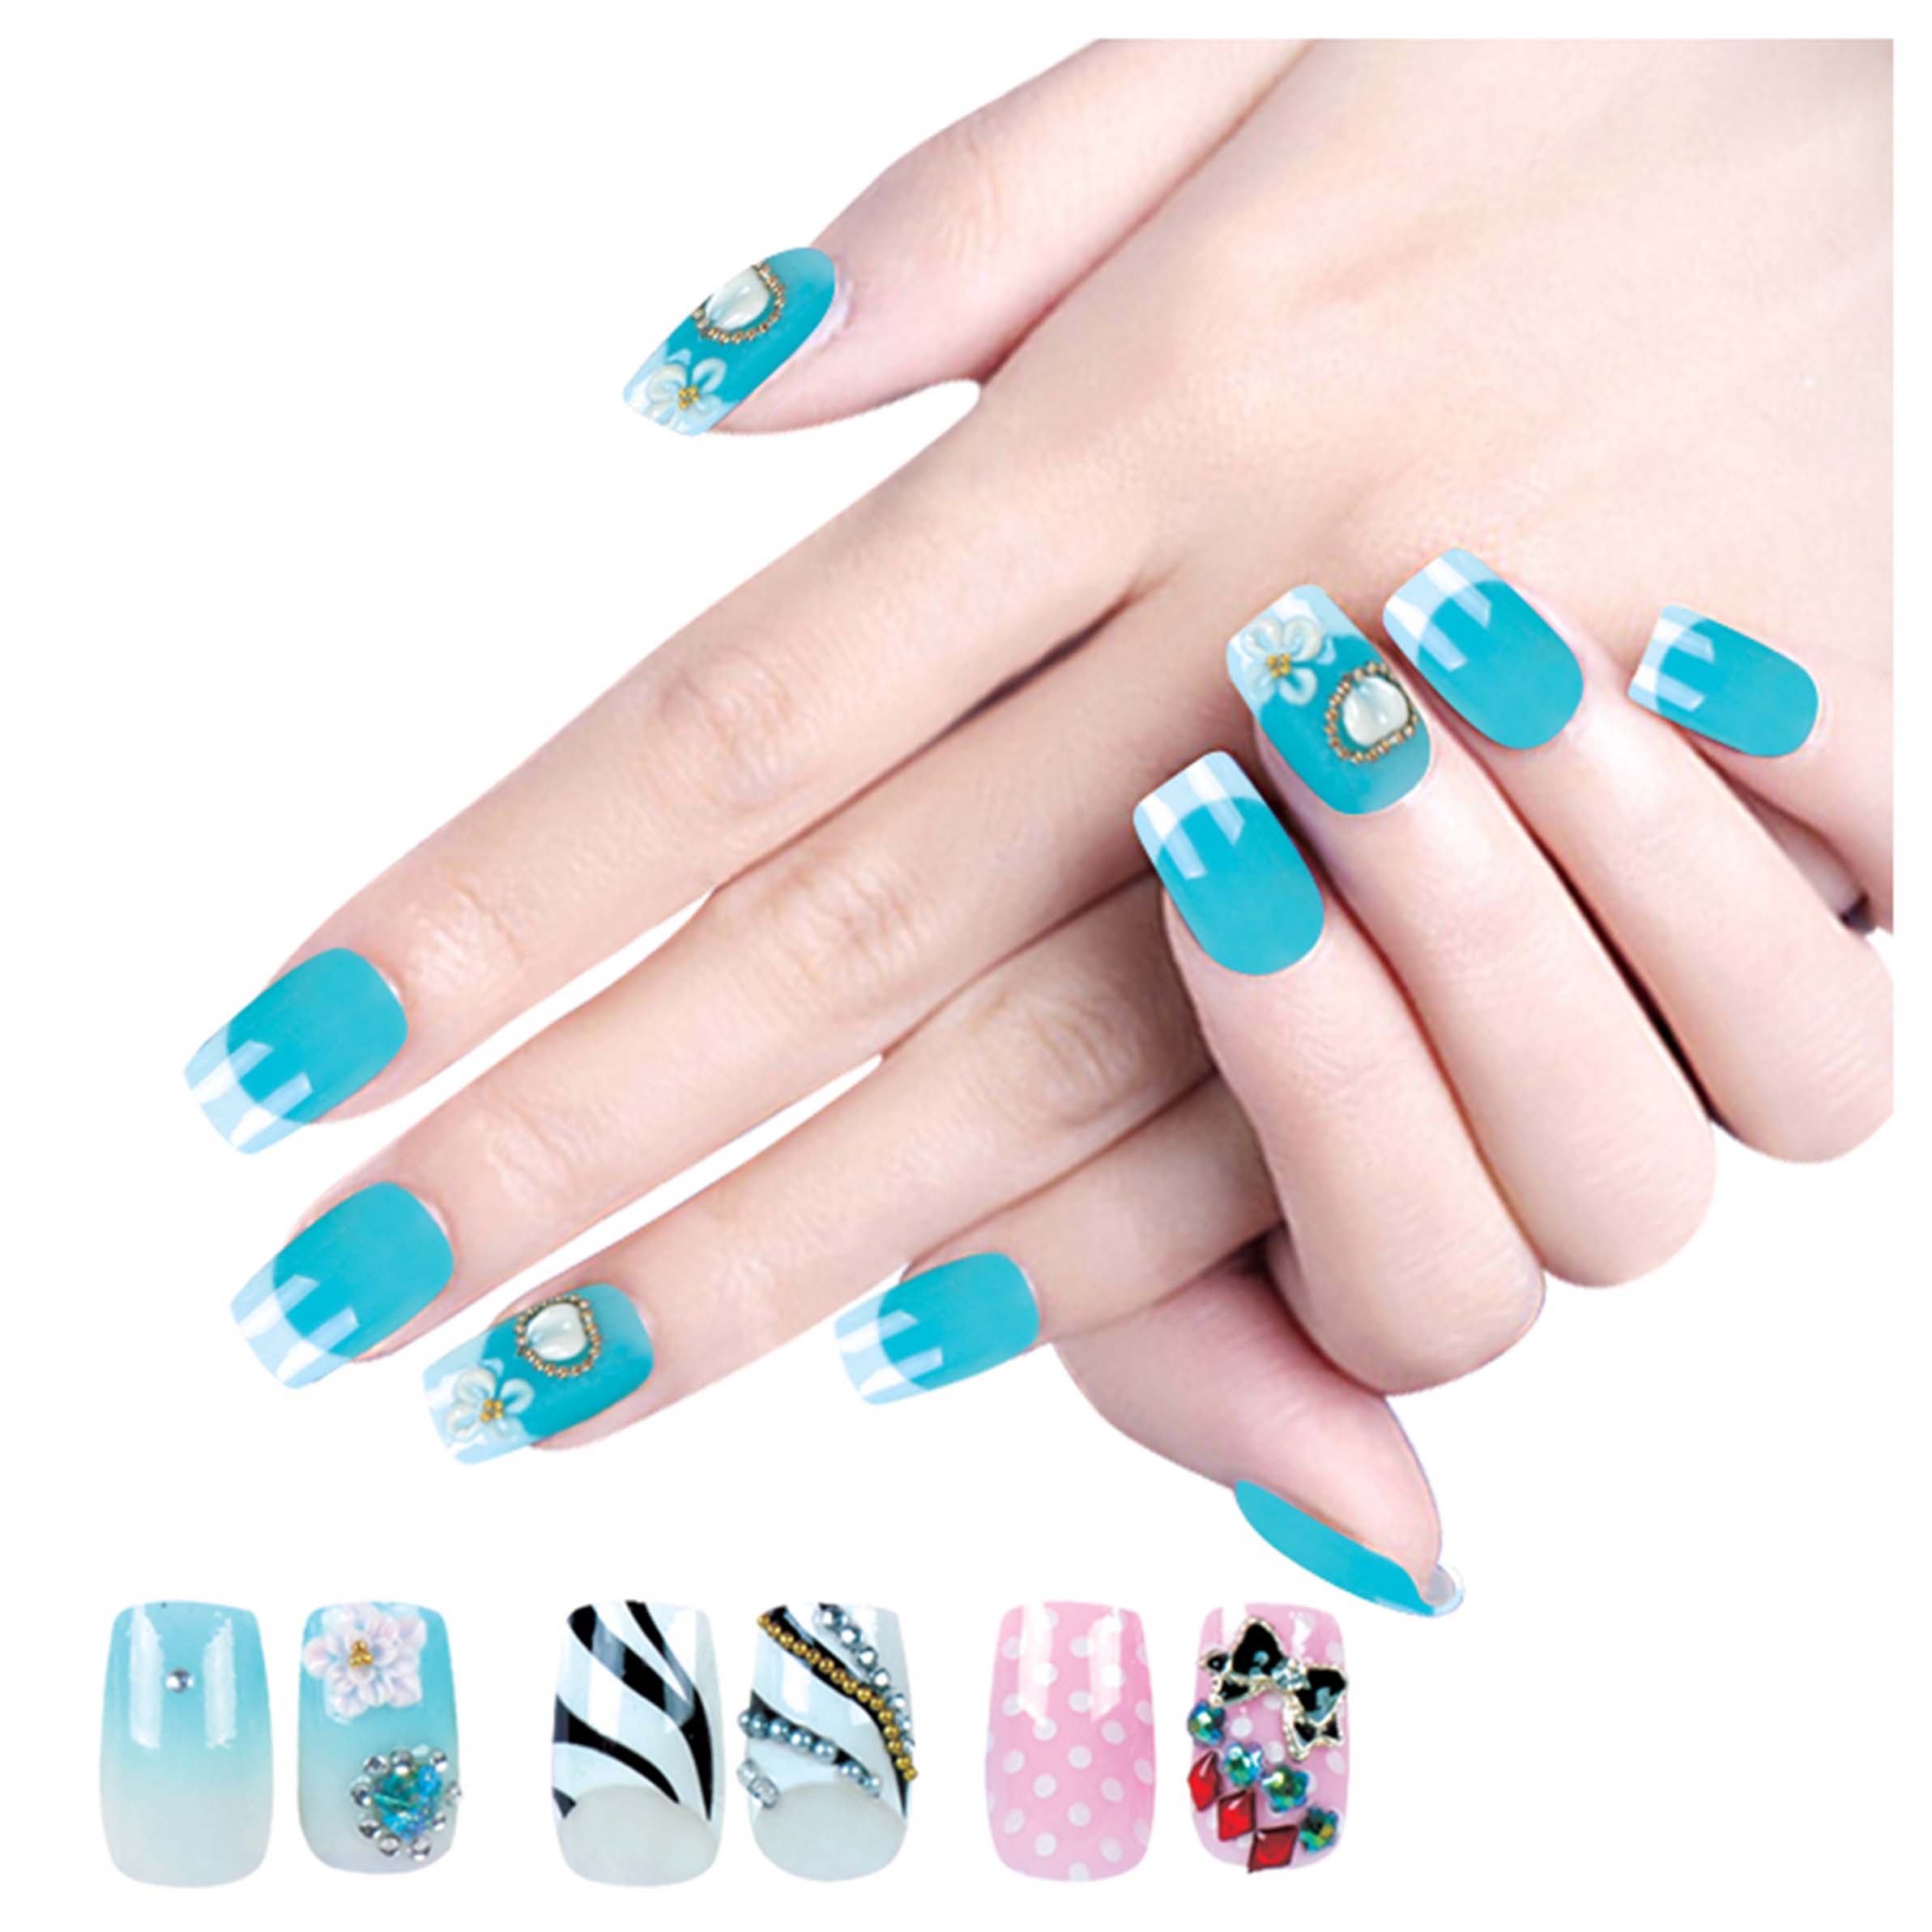 Become a Freelance Nail Specialist & Find Jobs or Gigs as a Manicurist